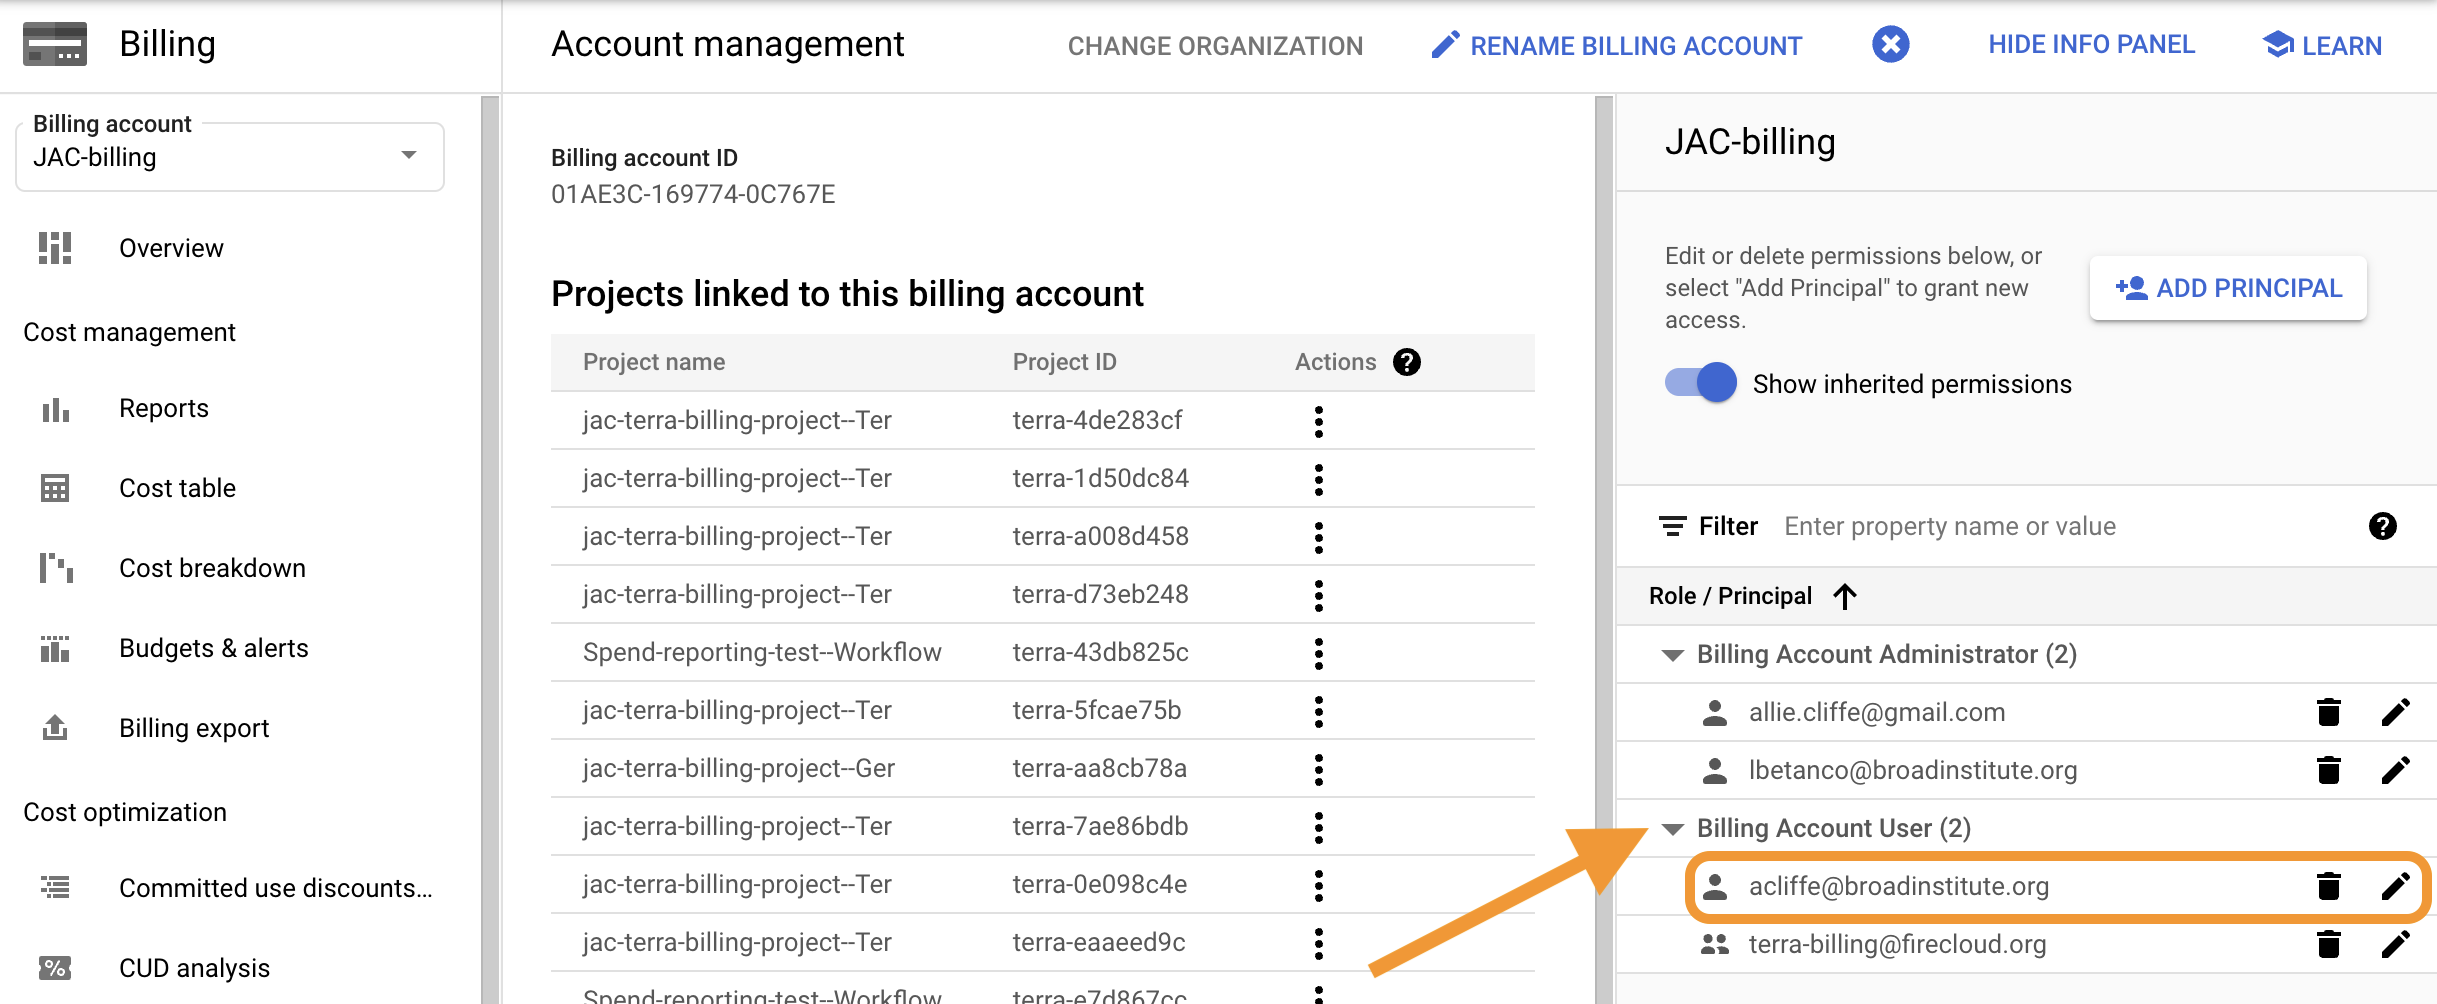 Screenshot of Account management page on Google cloud console with 'Billing Account User' section (at right) expanded and pencil icon next to user acliffe@broadinstitute.org circled.